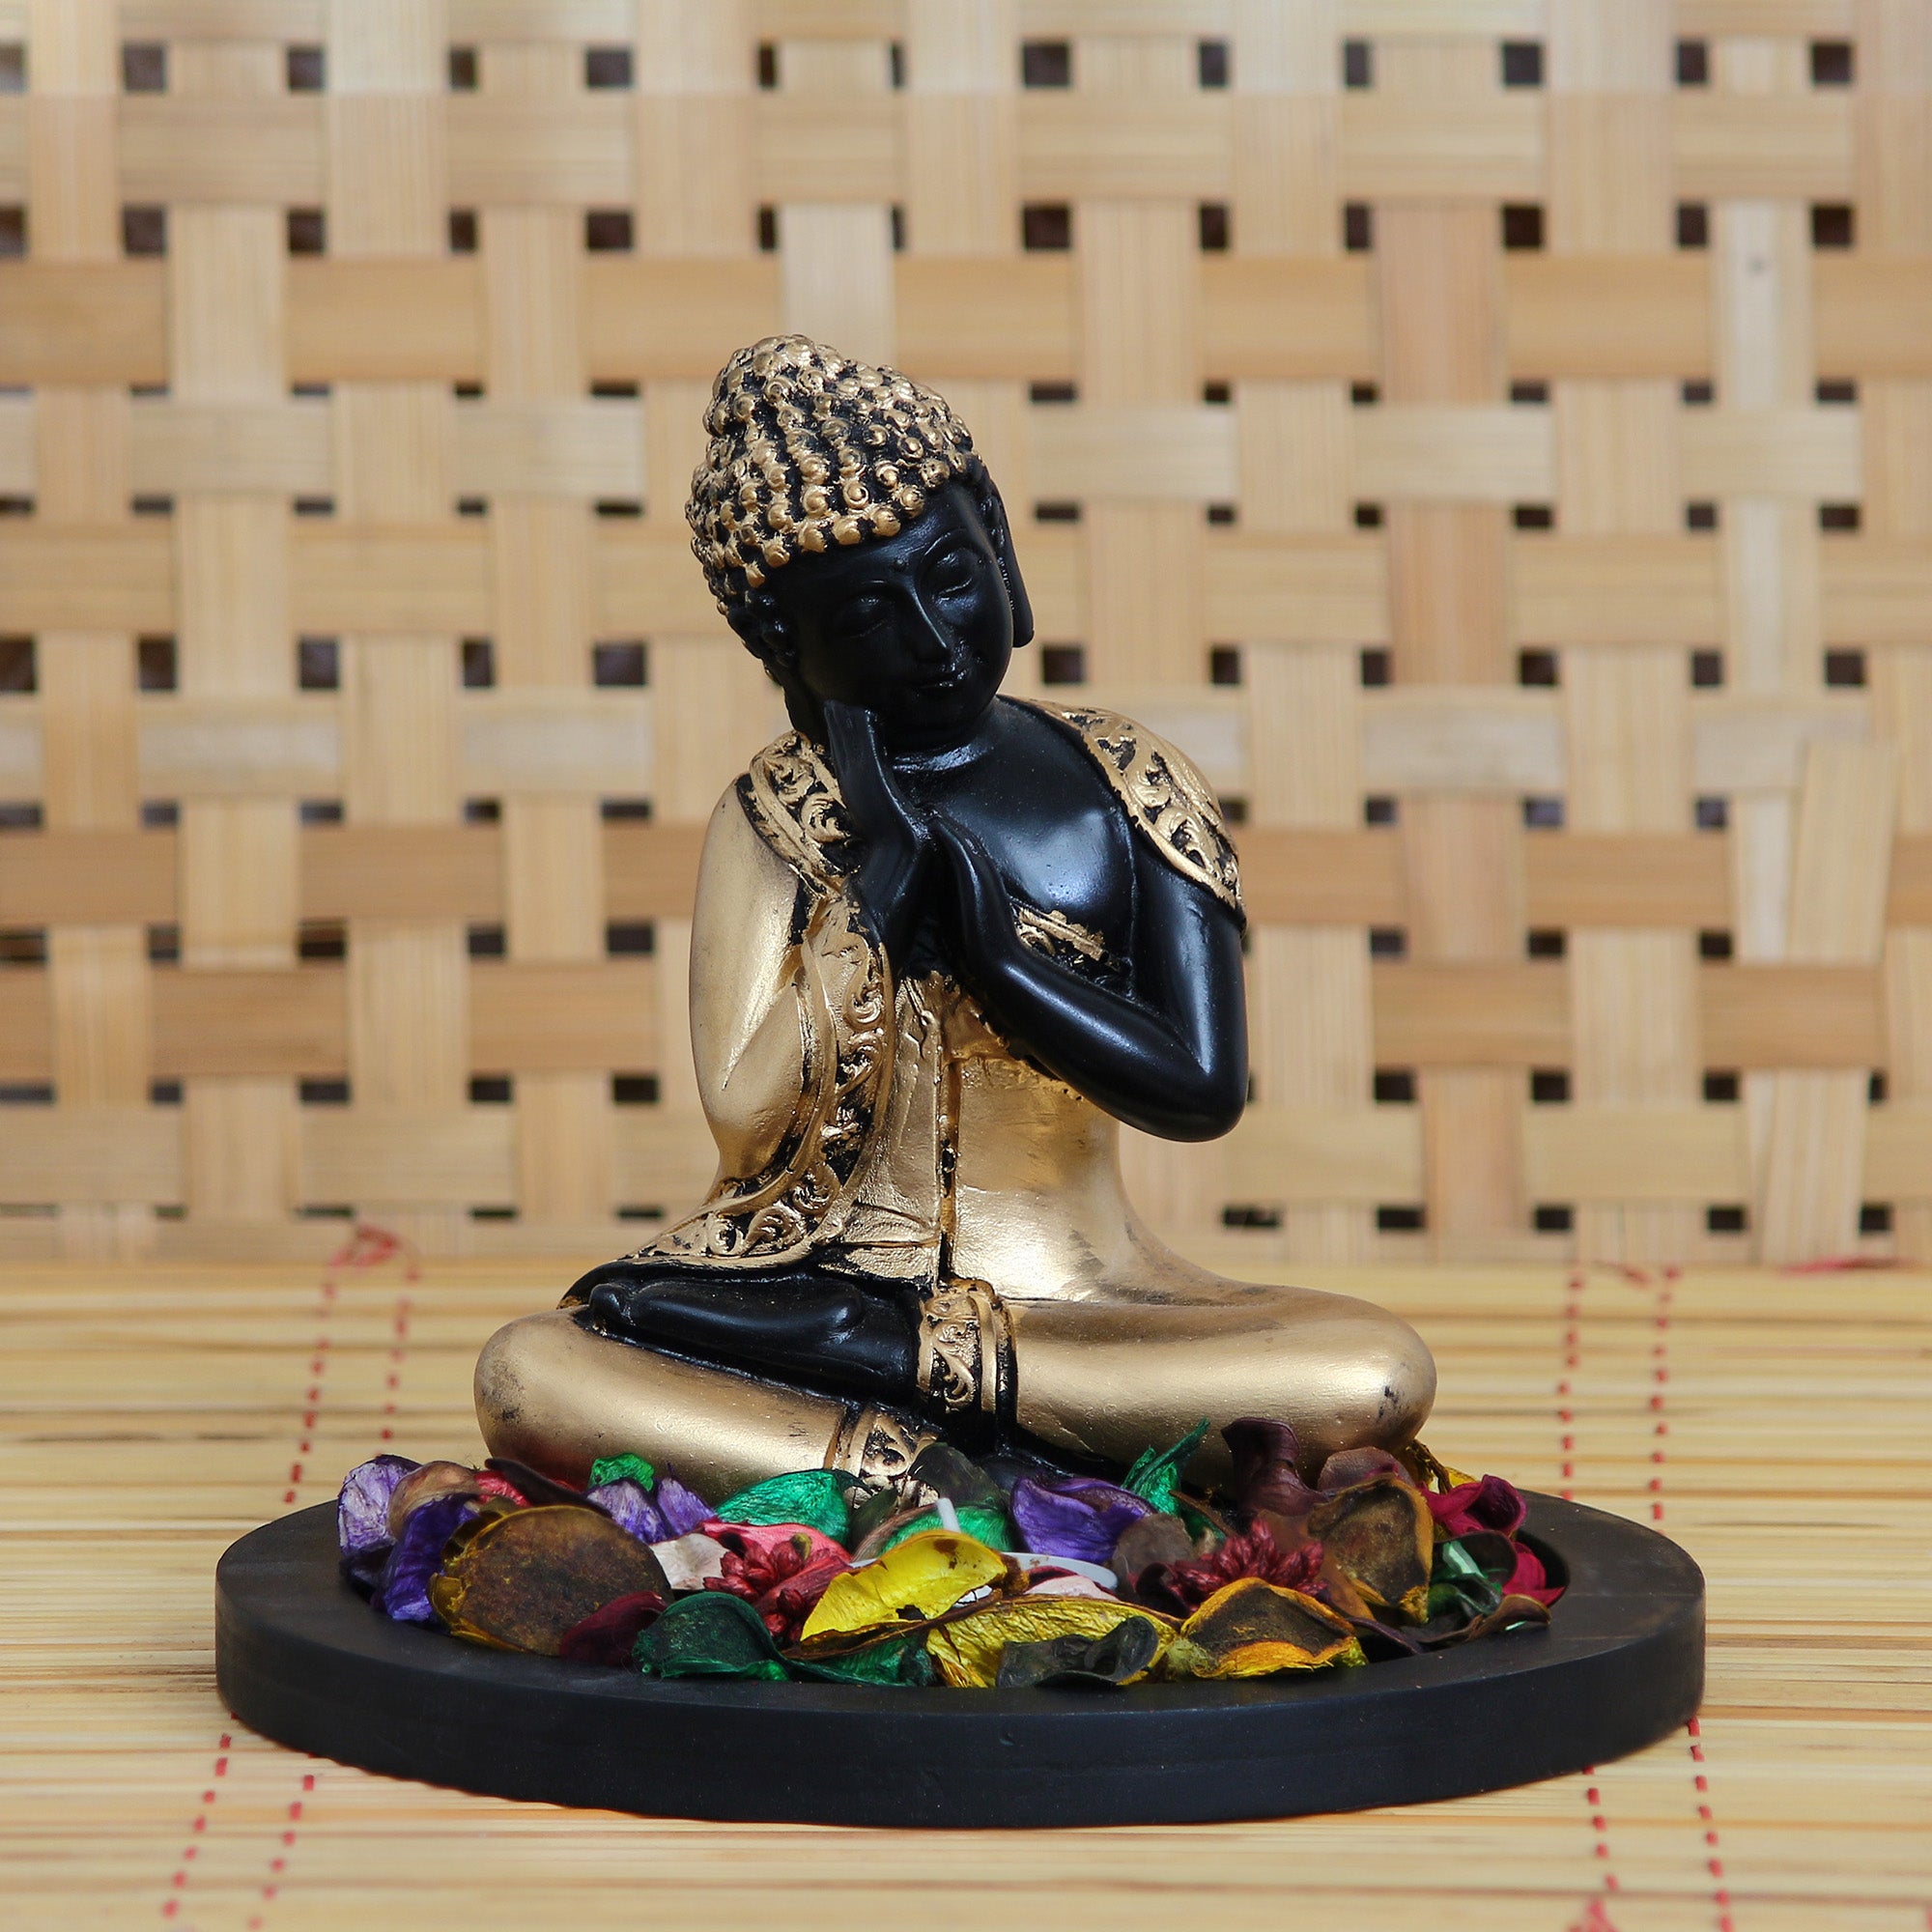 Polyresin Black and Golden Resting Buddha Statue with Wooden Base, Fragranced Petals and Tealight